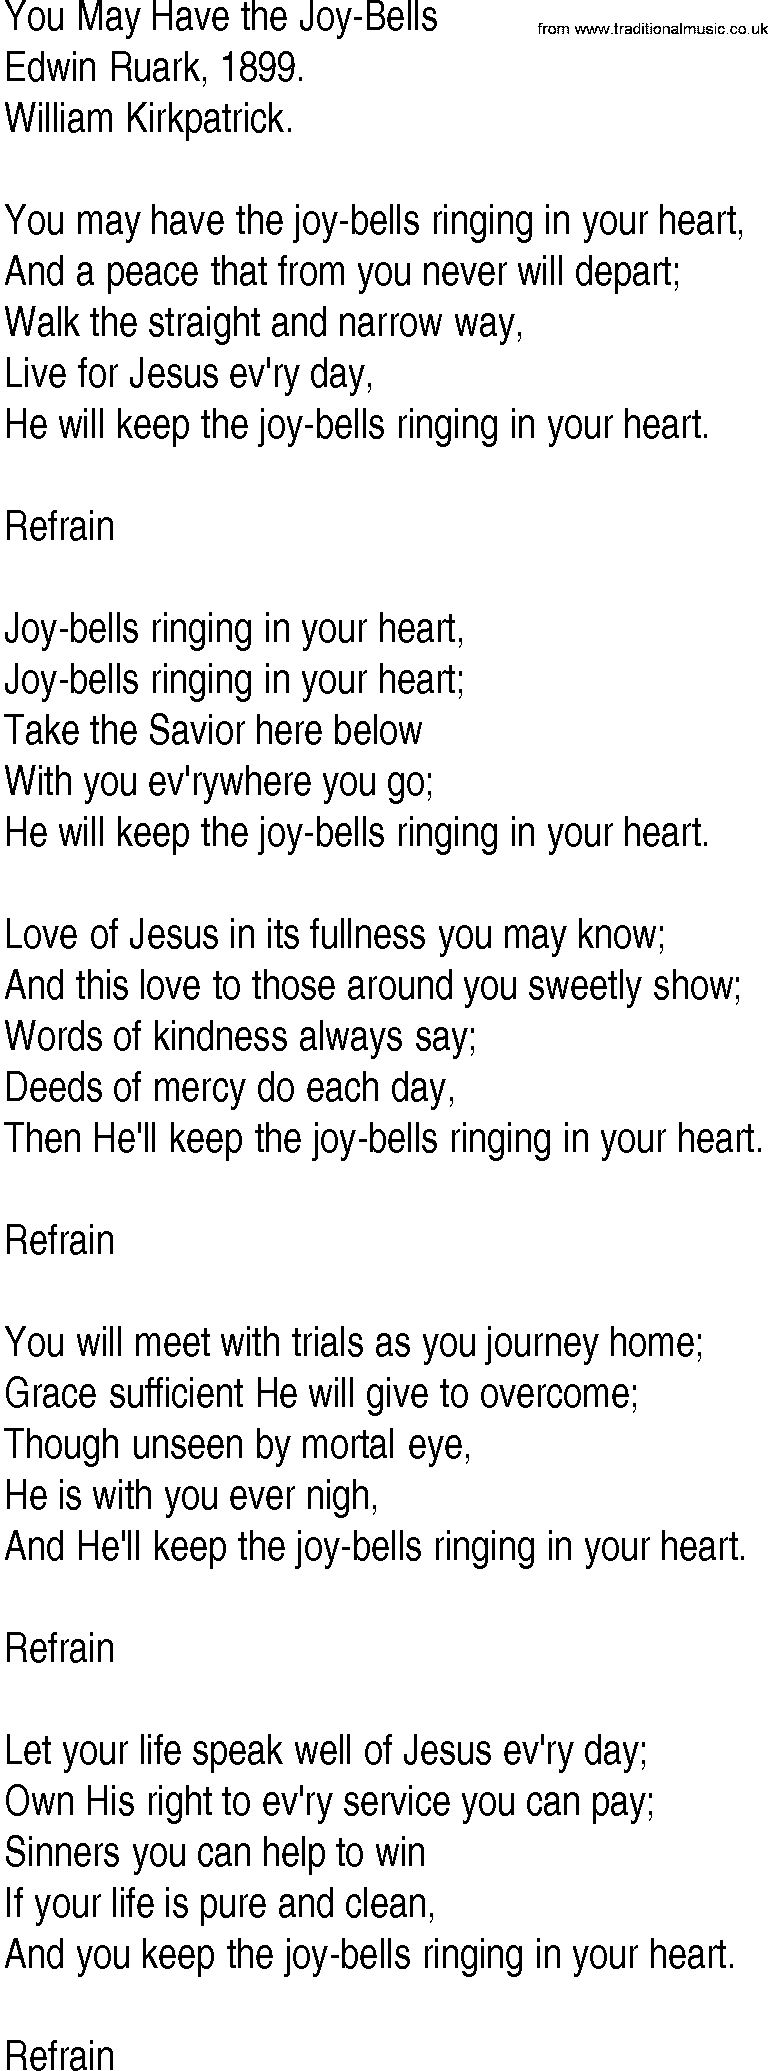 Hymn and Gospel Song: You May Have the Joy-Bells by Edwin Ruark lyrics